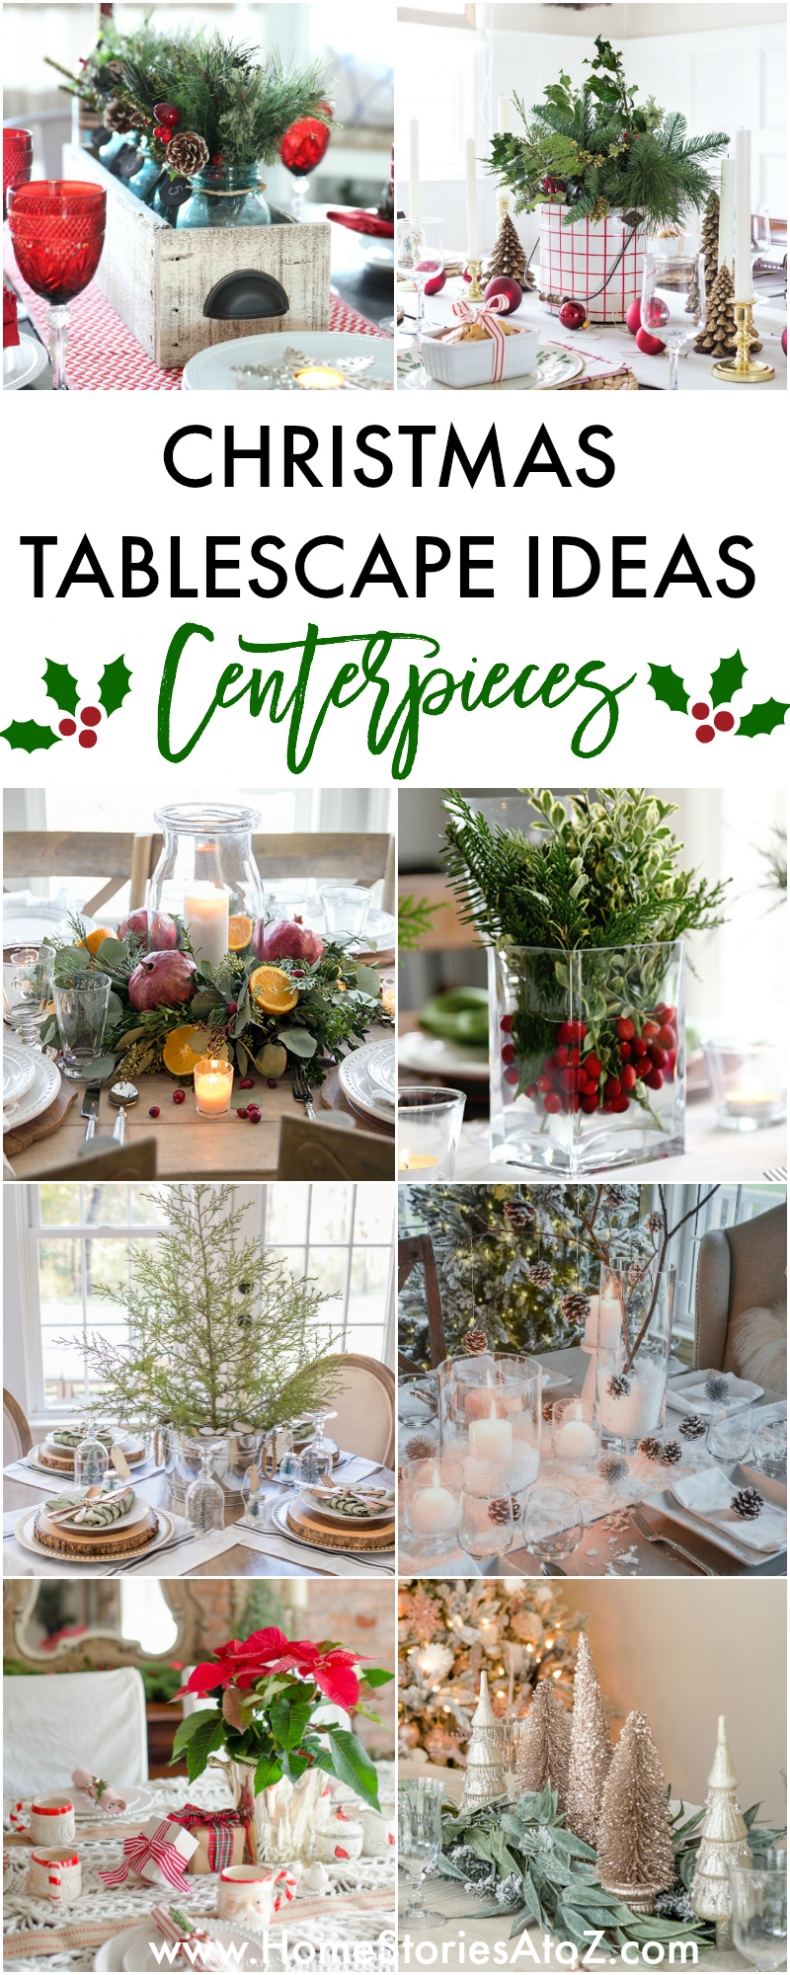 Decor Ideas Gorgeous, Holiday Centerpiece Ideas For Round Tables